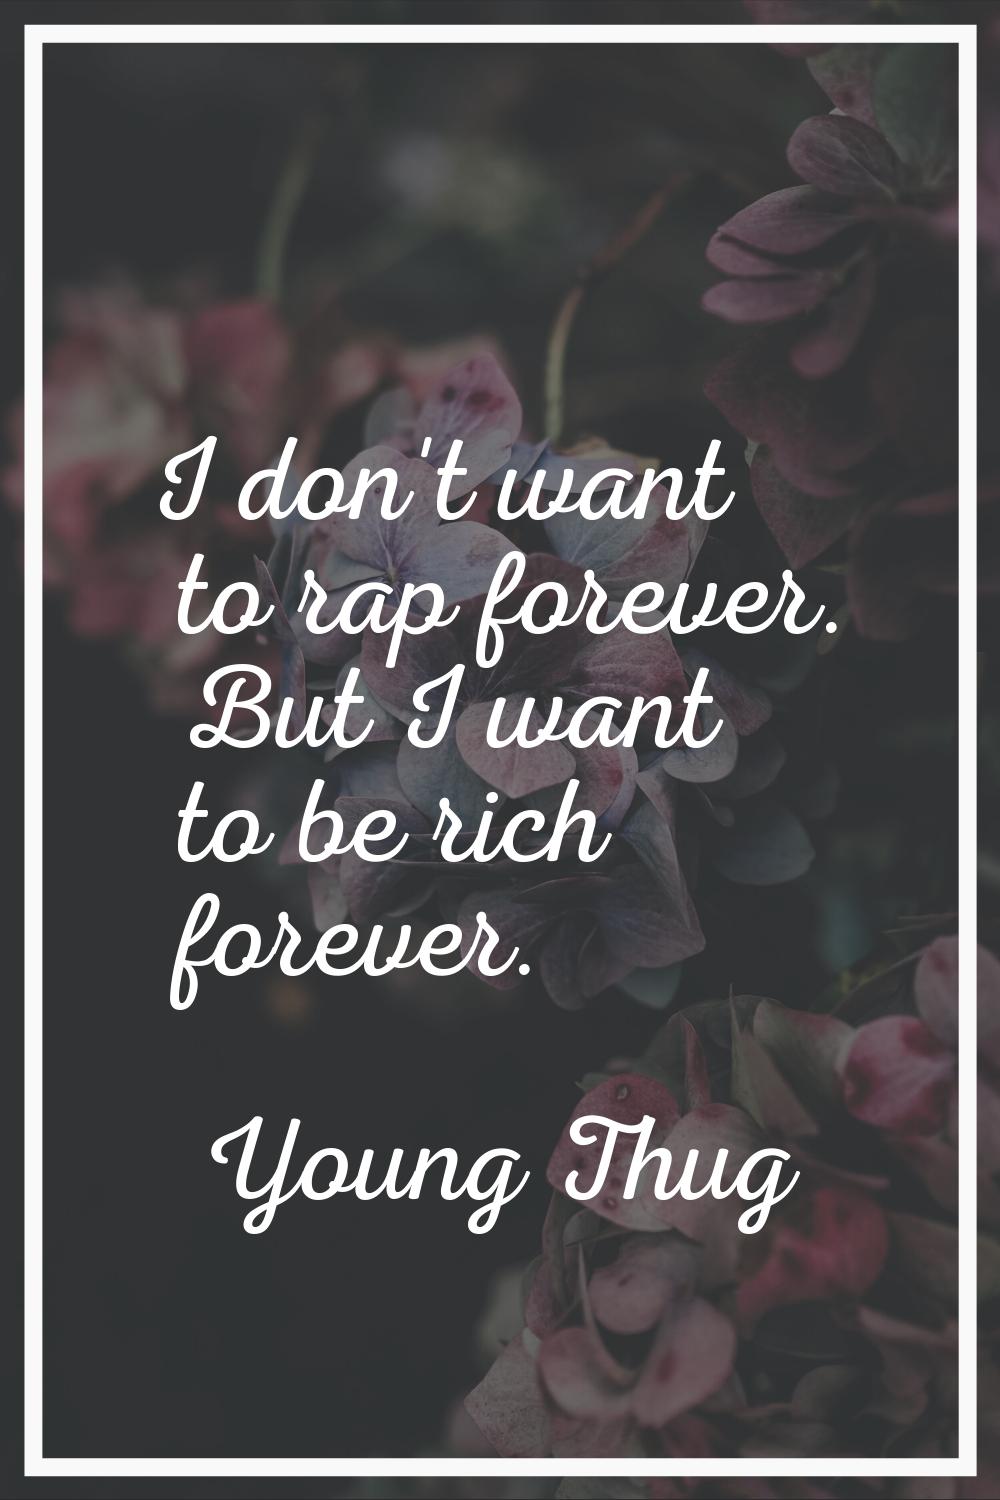 I don't want to rap forever. But I want to be rich forever.